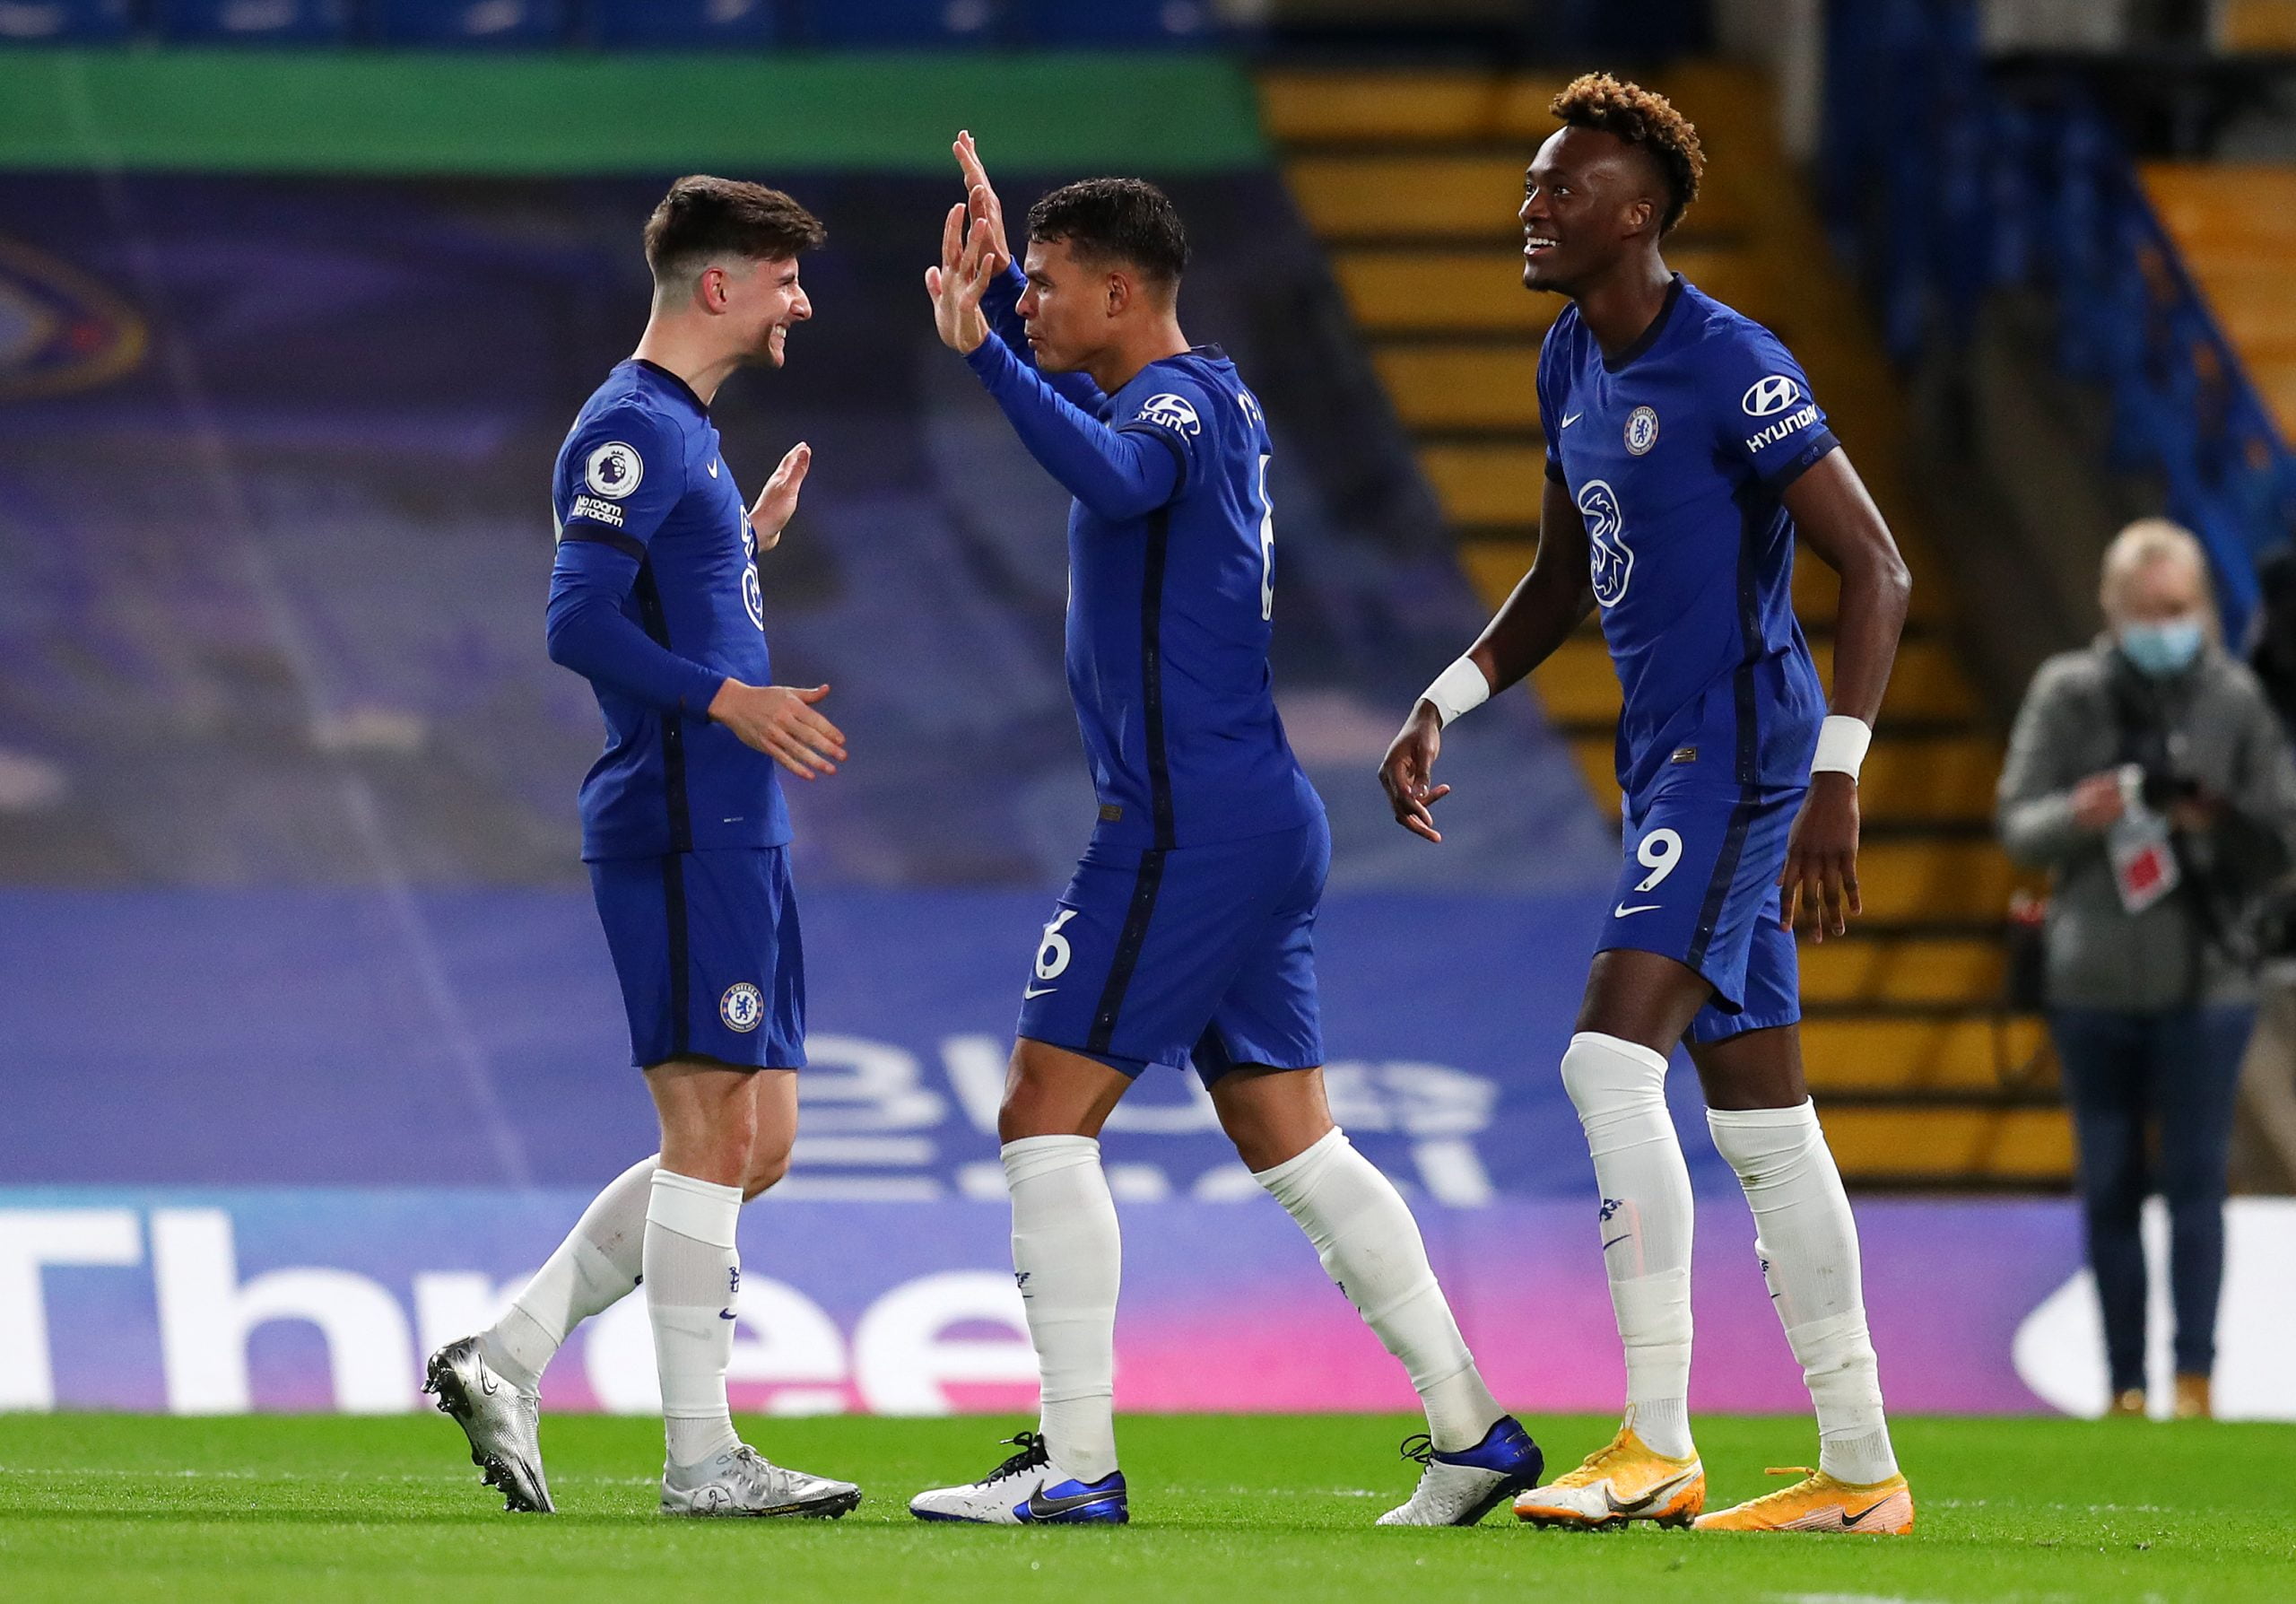 Thiago Silva of Chelsea celebrates with teammates Mason Mount and Tammy Abraham after scoring their team's first goal during the Premier League match between Chelsea and West Ham United at Stamford Bridge on December 21, 2020 in London, England.  (Photo by Catherine Ivill/Getty Images)